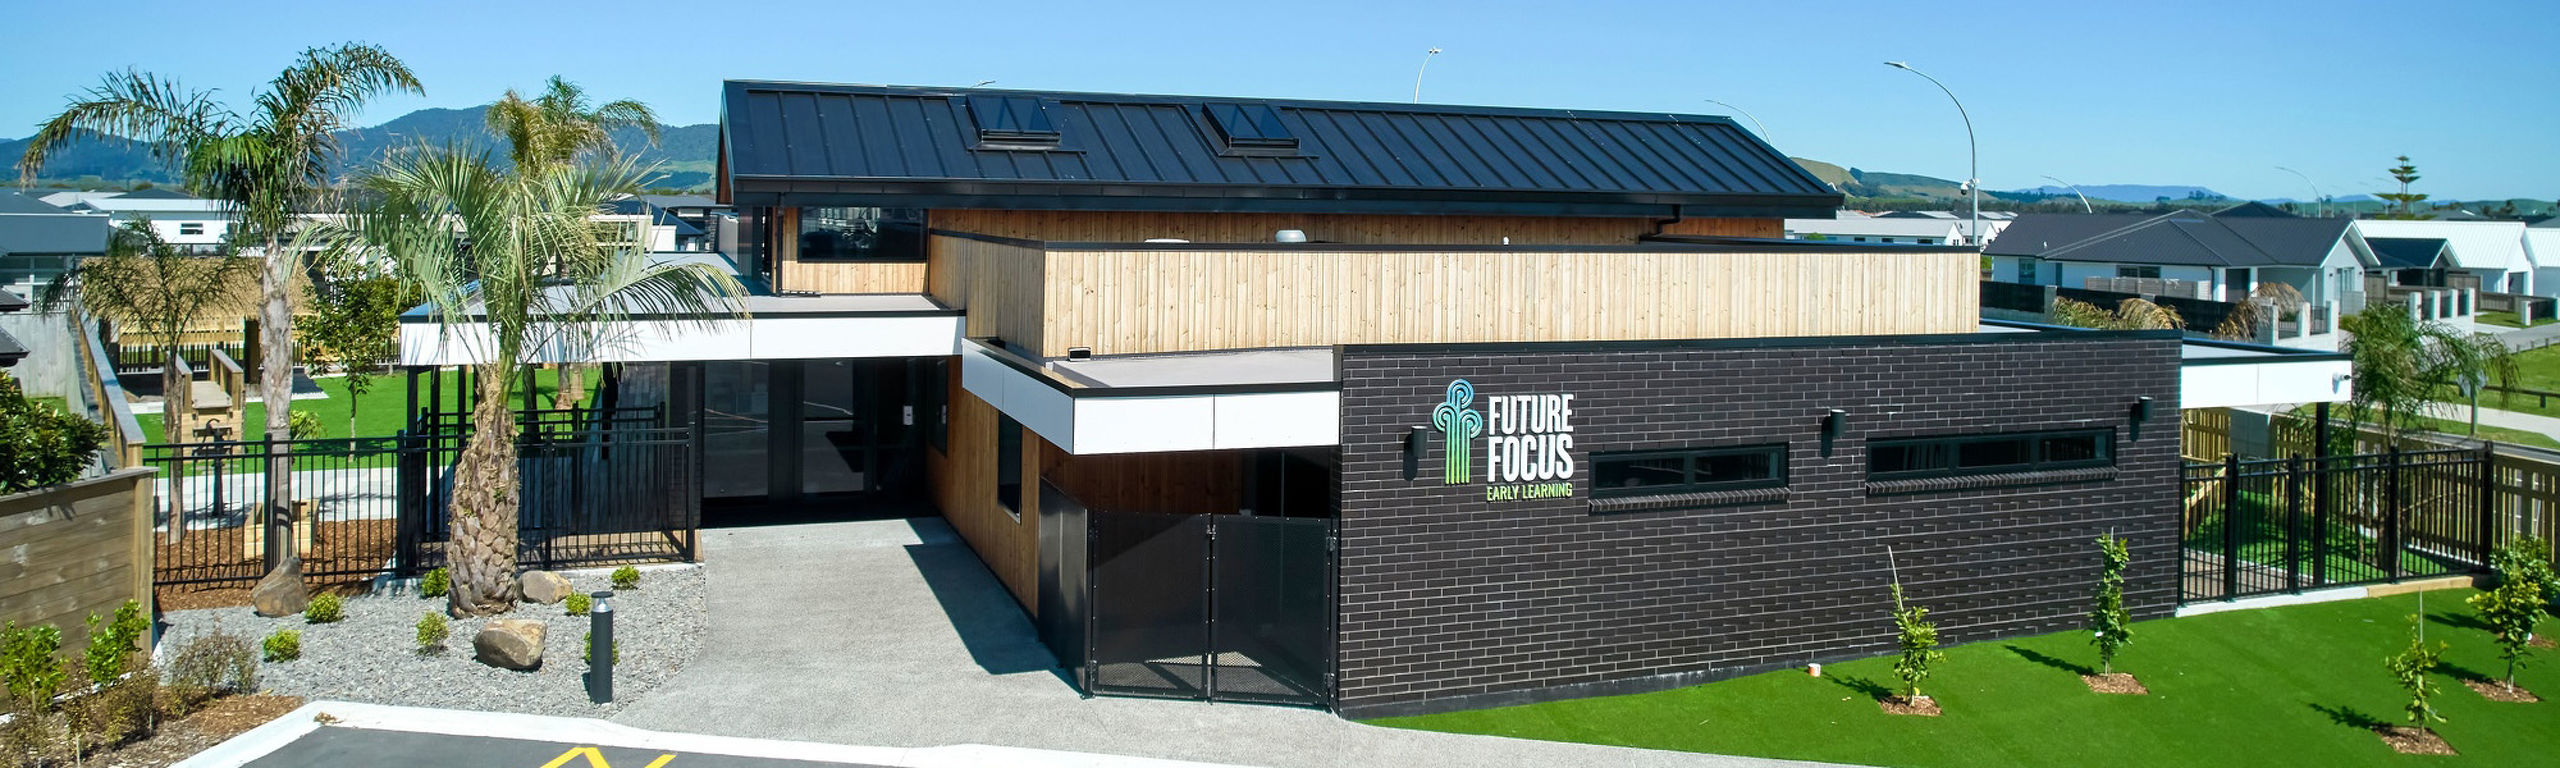 Future Focus Early Learning Centre